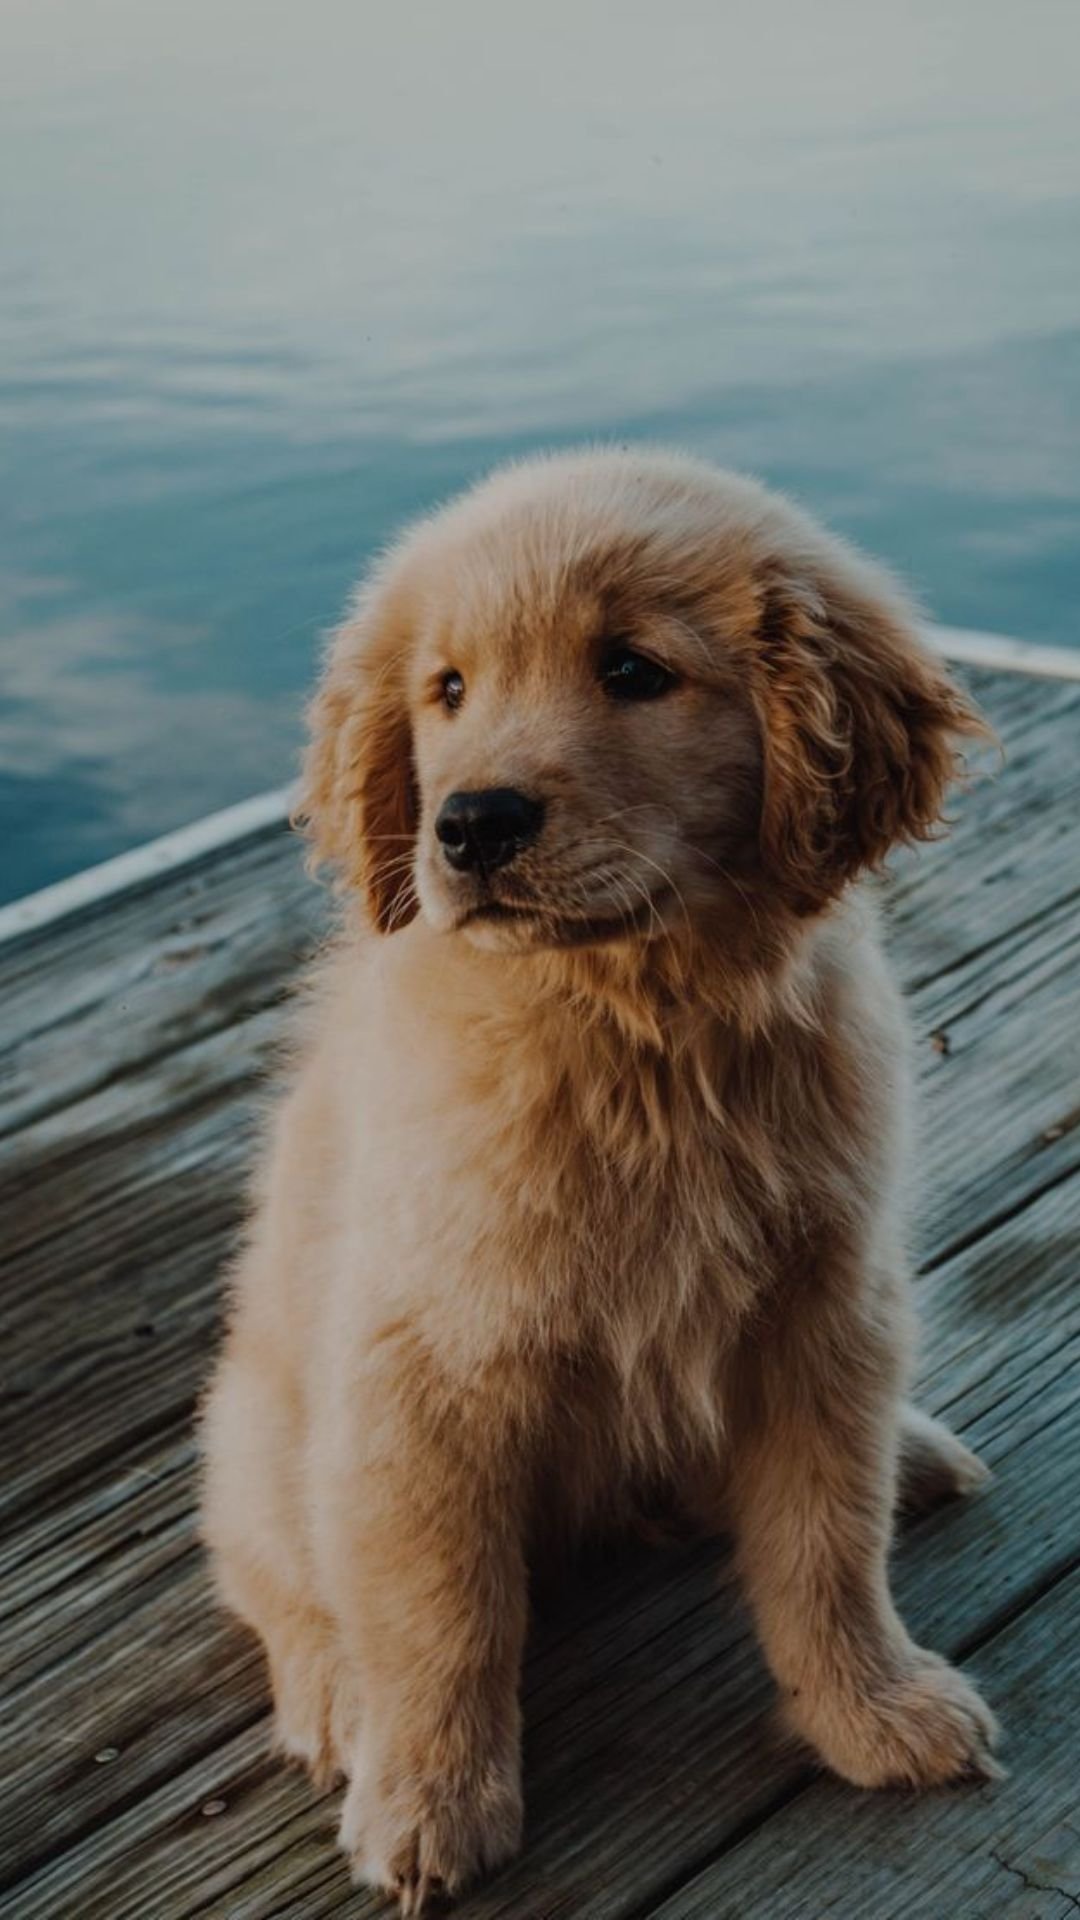 151 High Quality Iphone Wallpapers  Page 5 of 9  Desktop backgrounds   Desktop backgrounds  Dogs Golden retriever Dog lovers